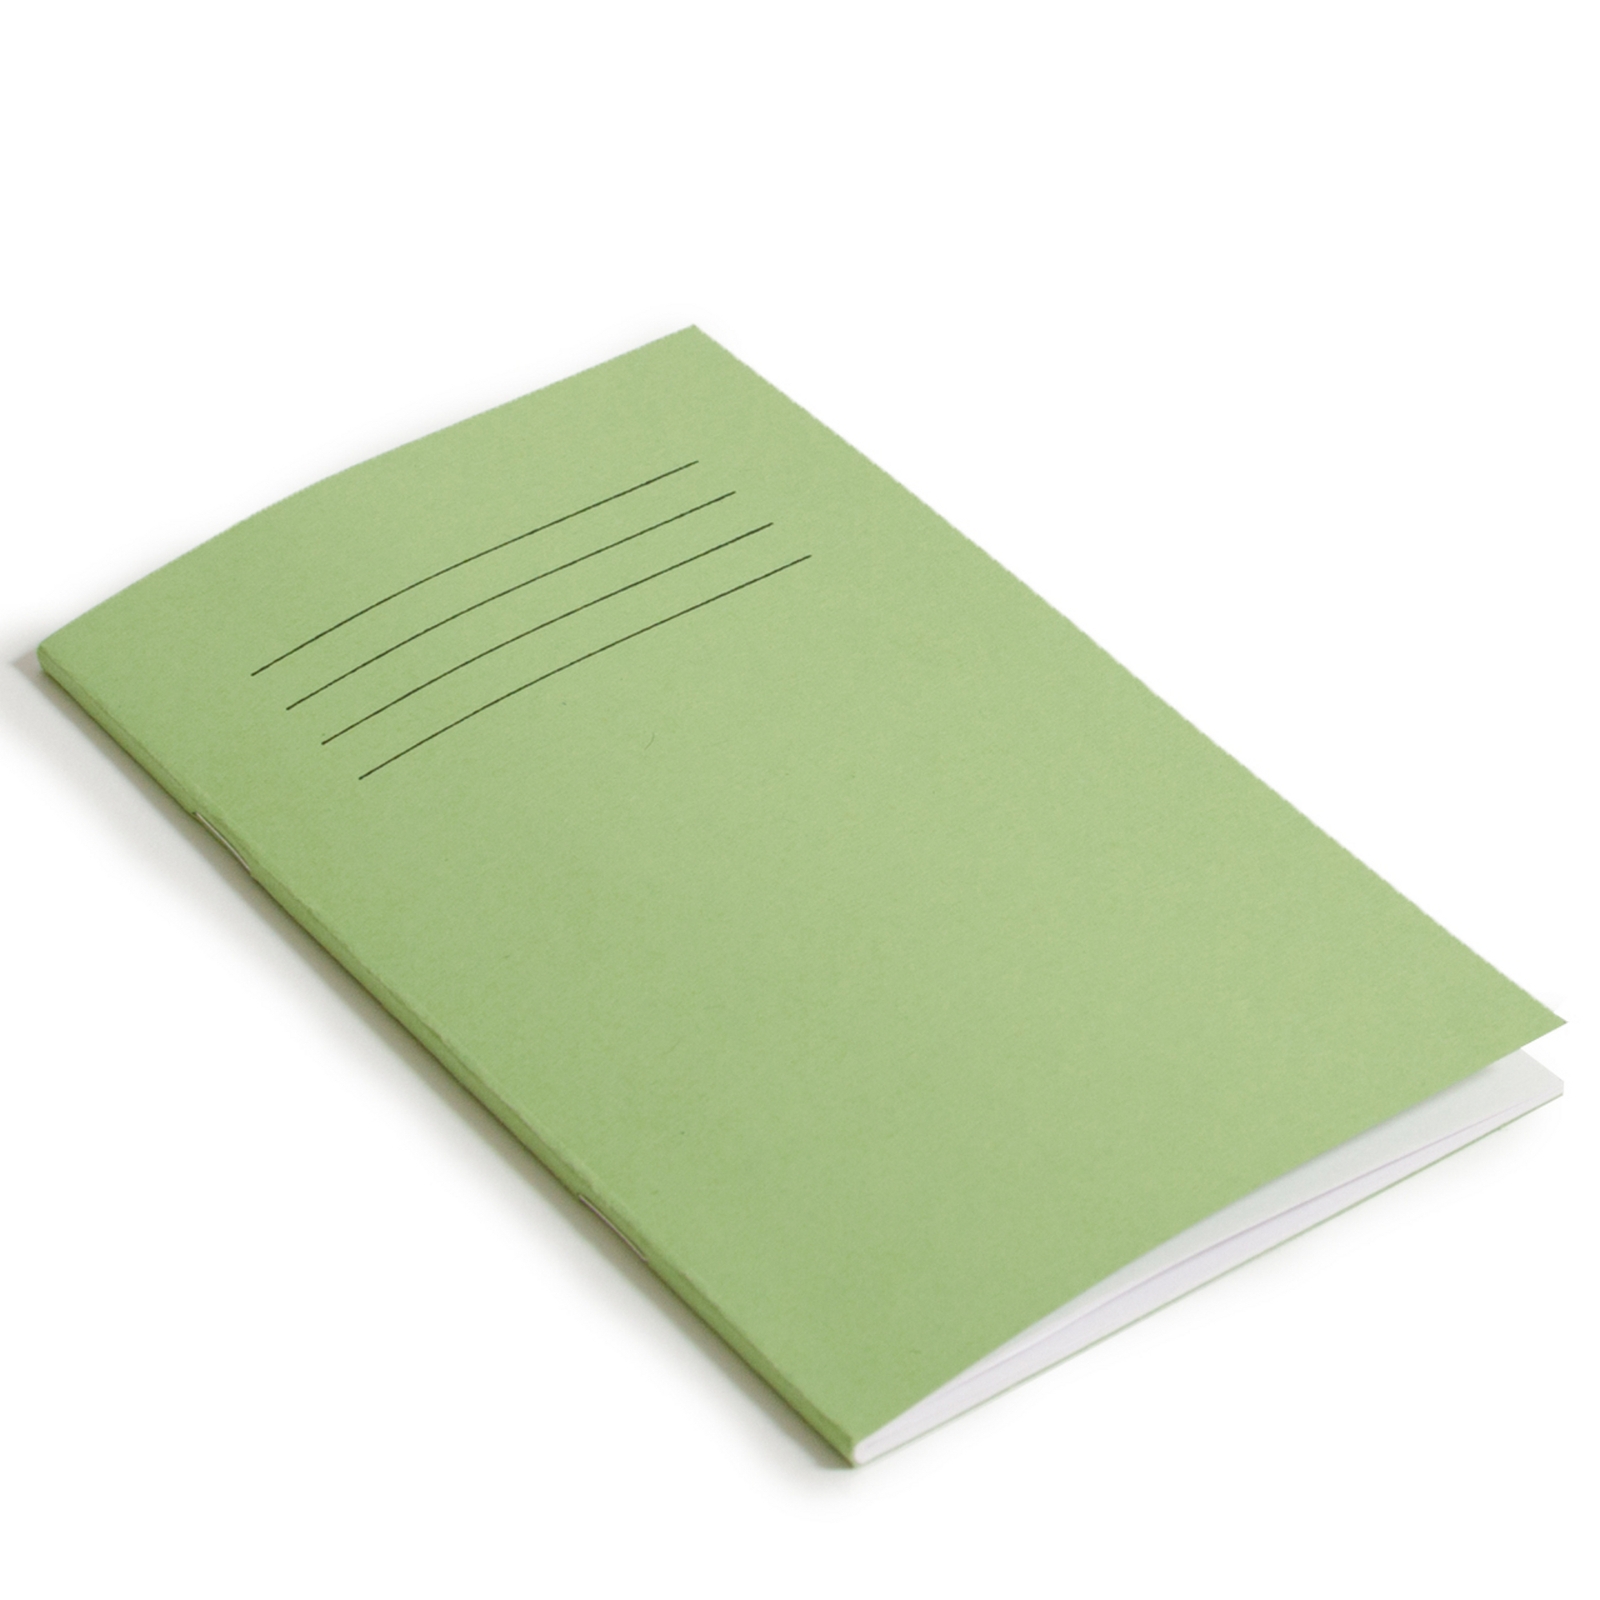 8 x 4"/200 x 100mm Green Cover 7mm Ruled Vocabulary Book - 48 Pages - Pack of 100